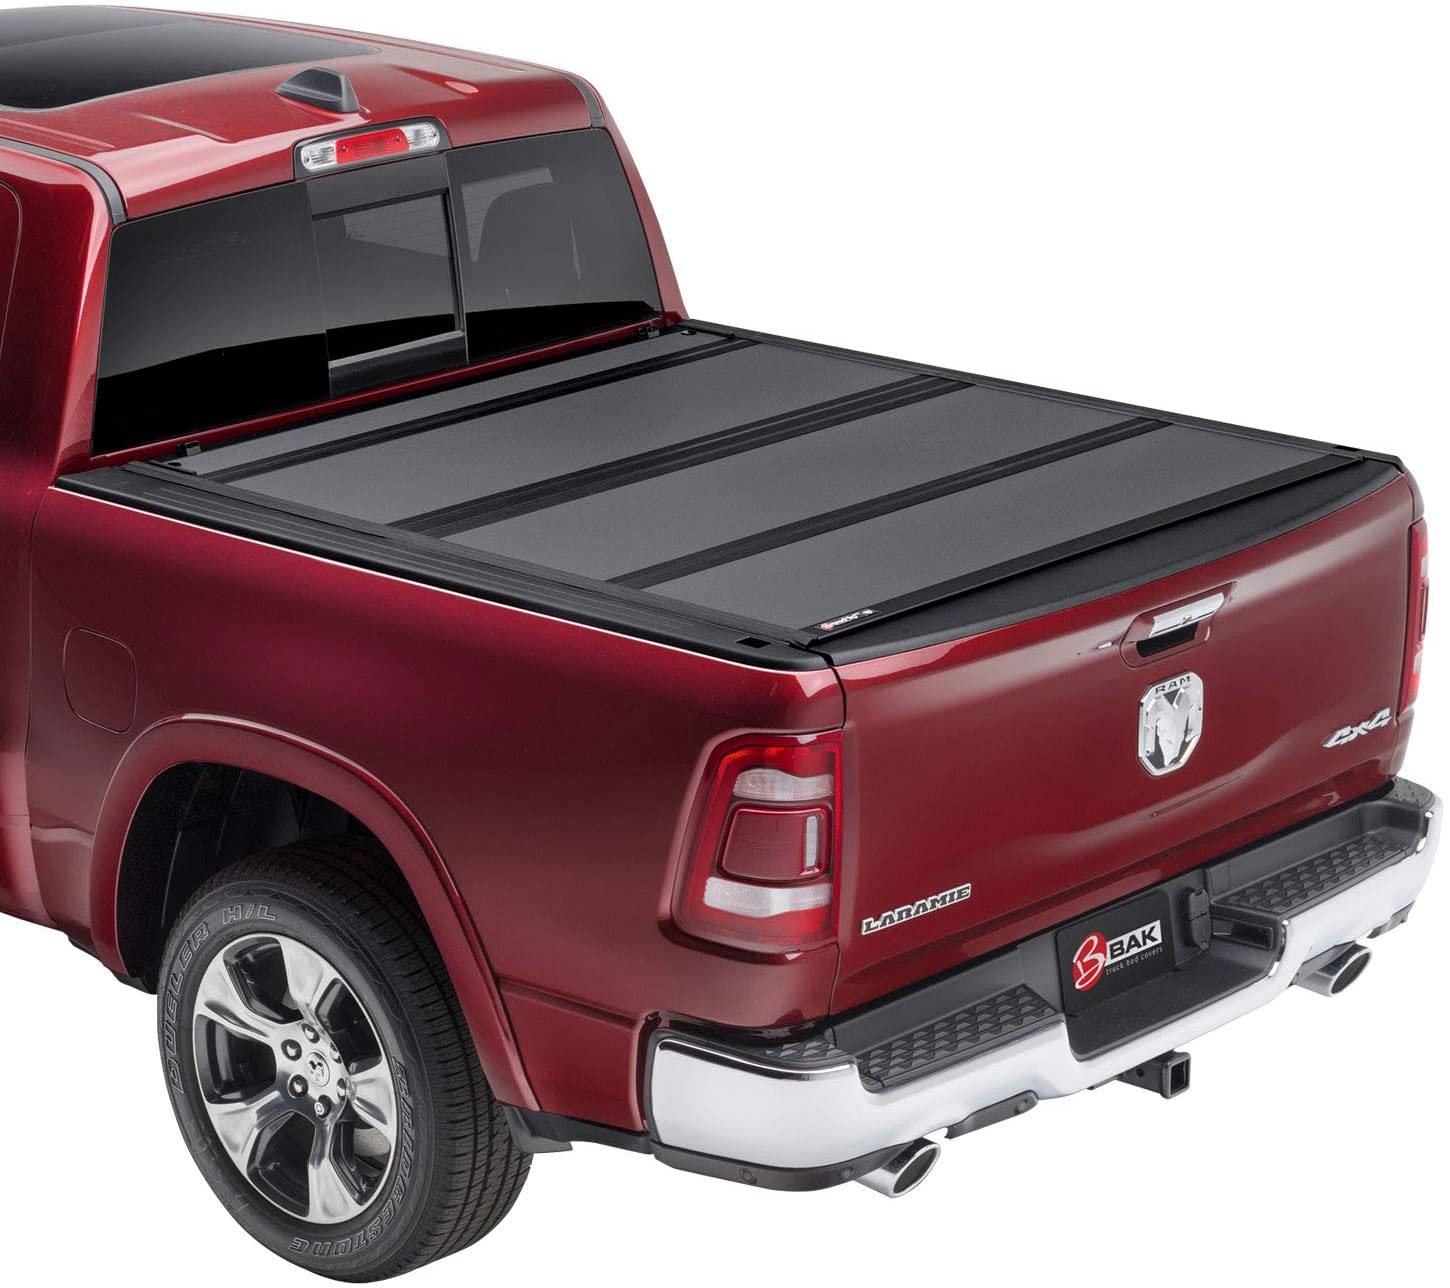 2019 Dodge Ram 1500 Hard Bed Cover